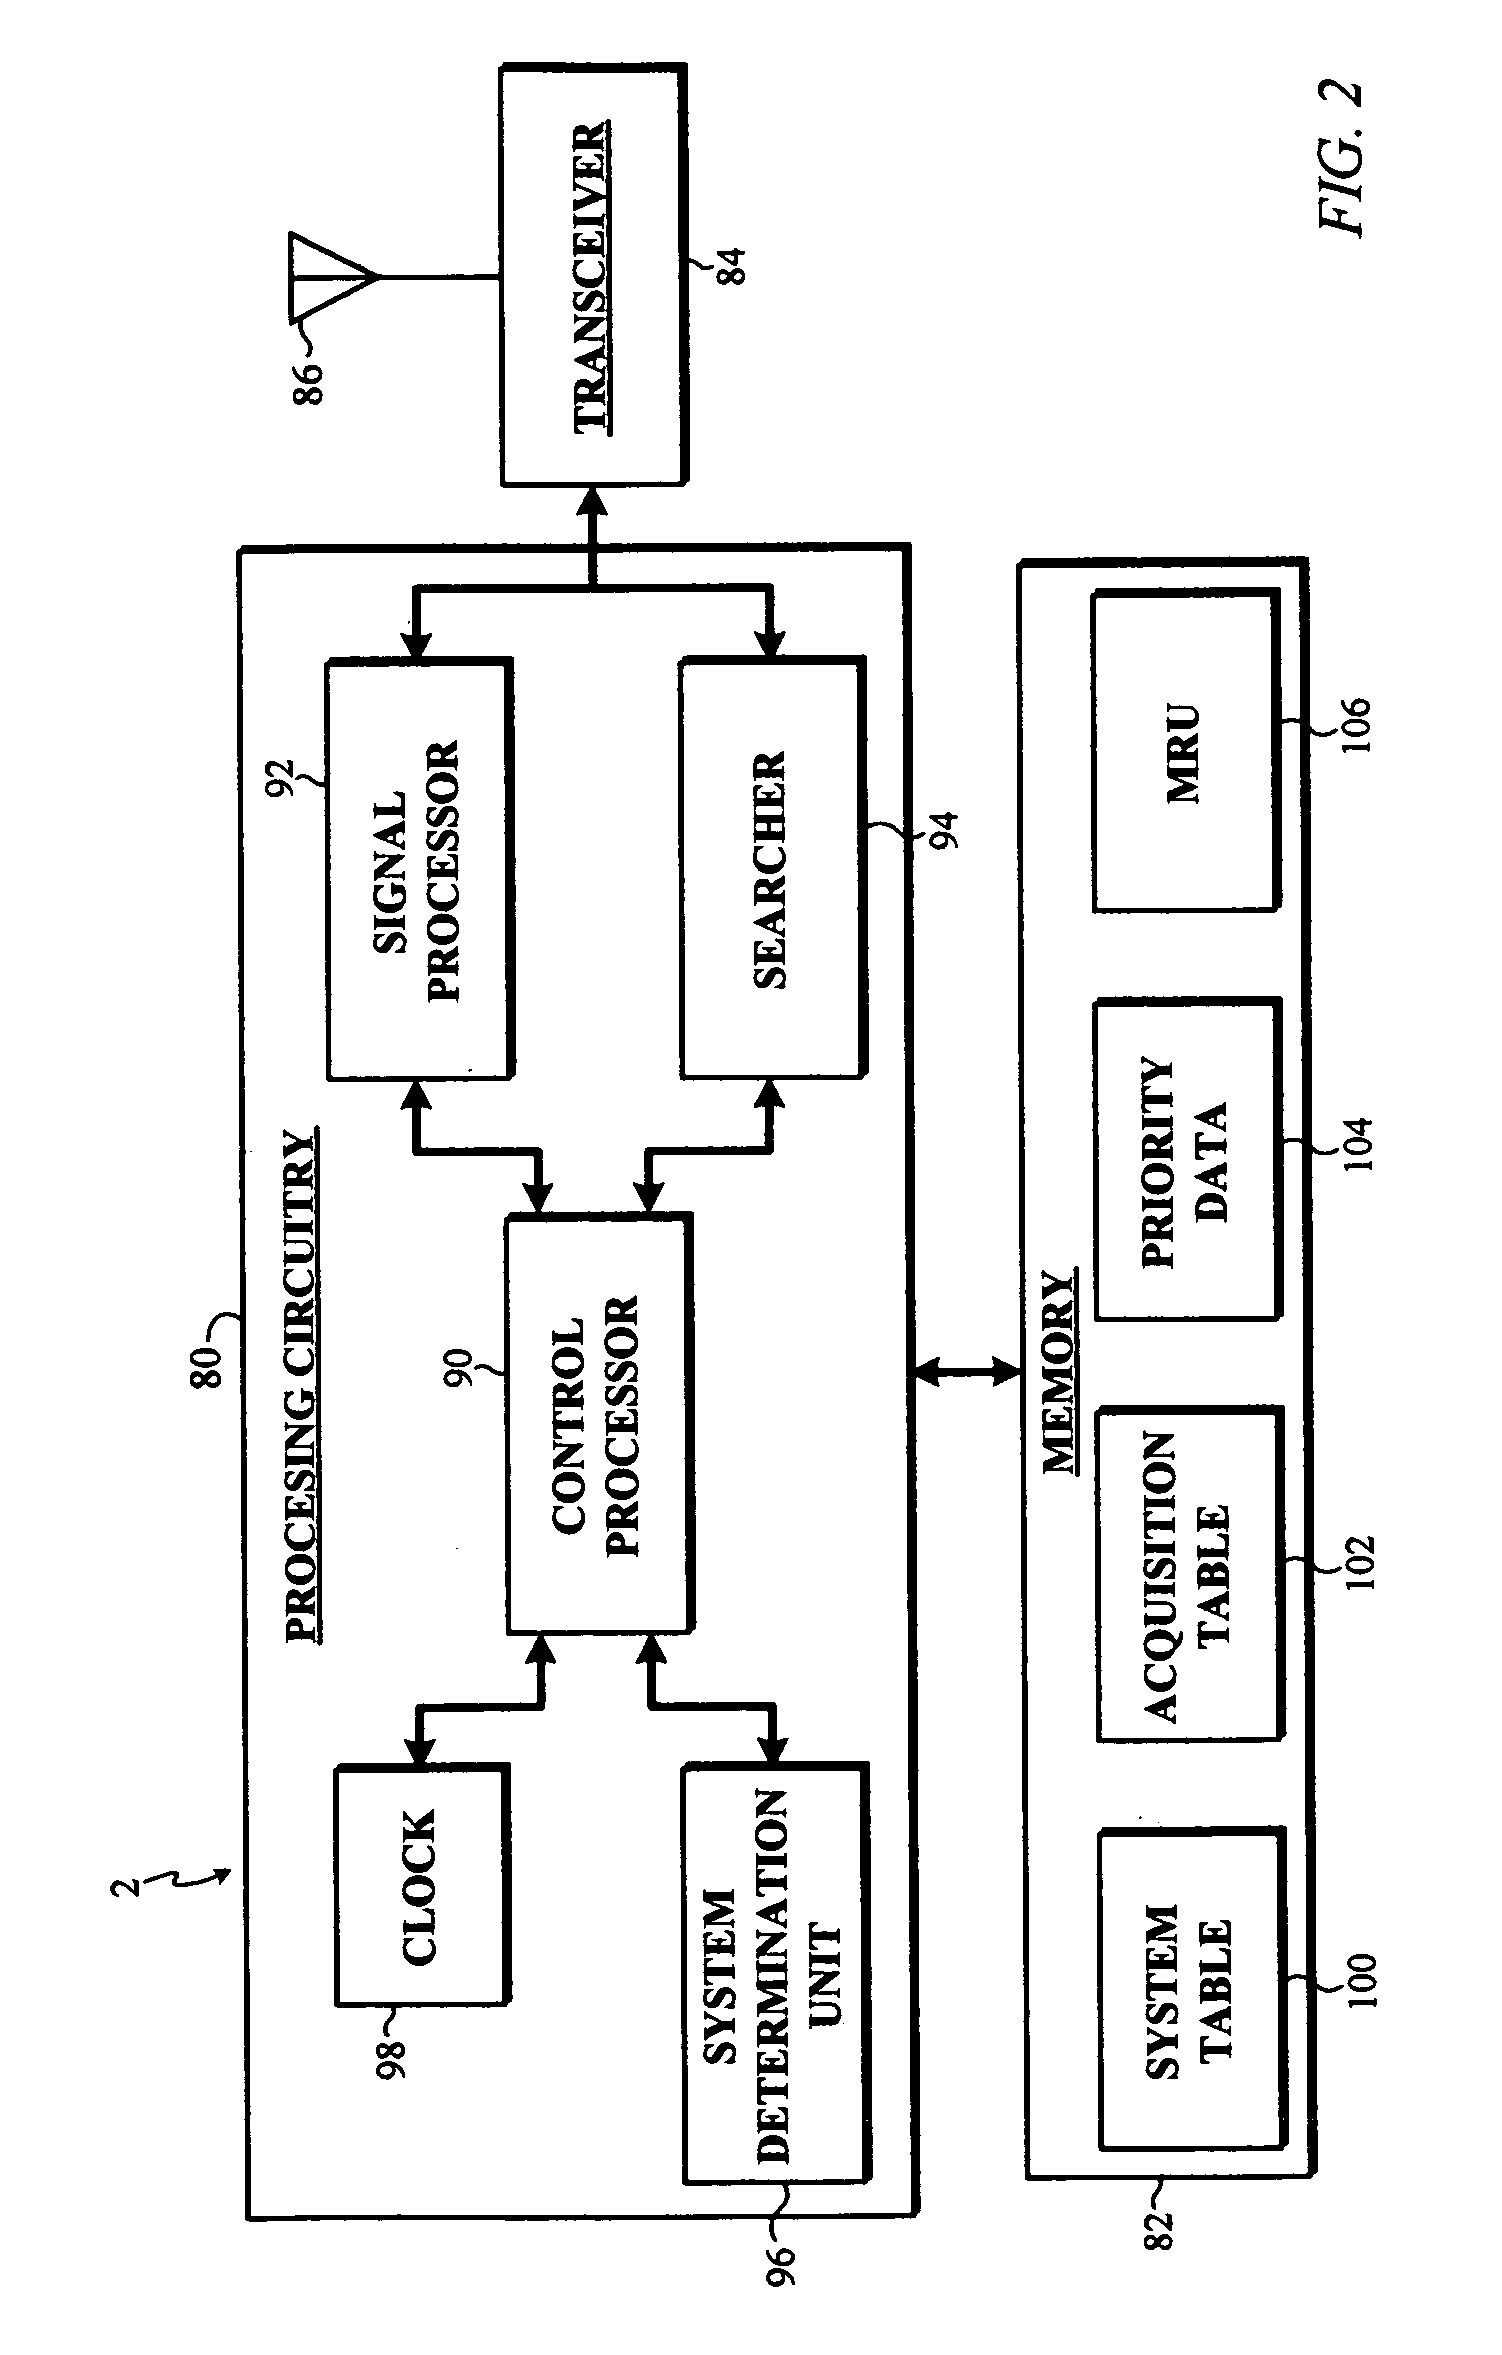 Method and apparatus for efficient selection and acquisition of a wireless communications system